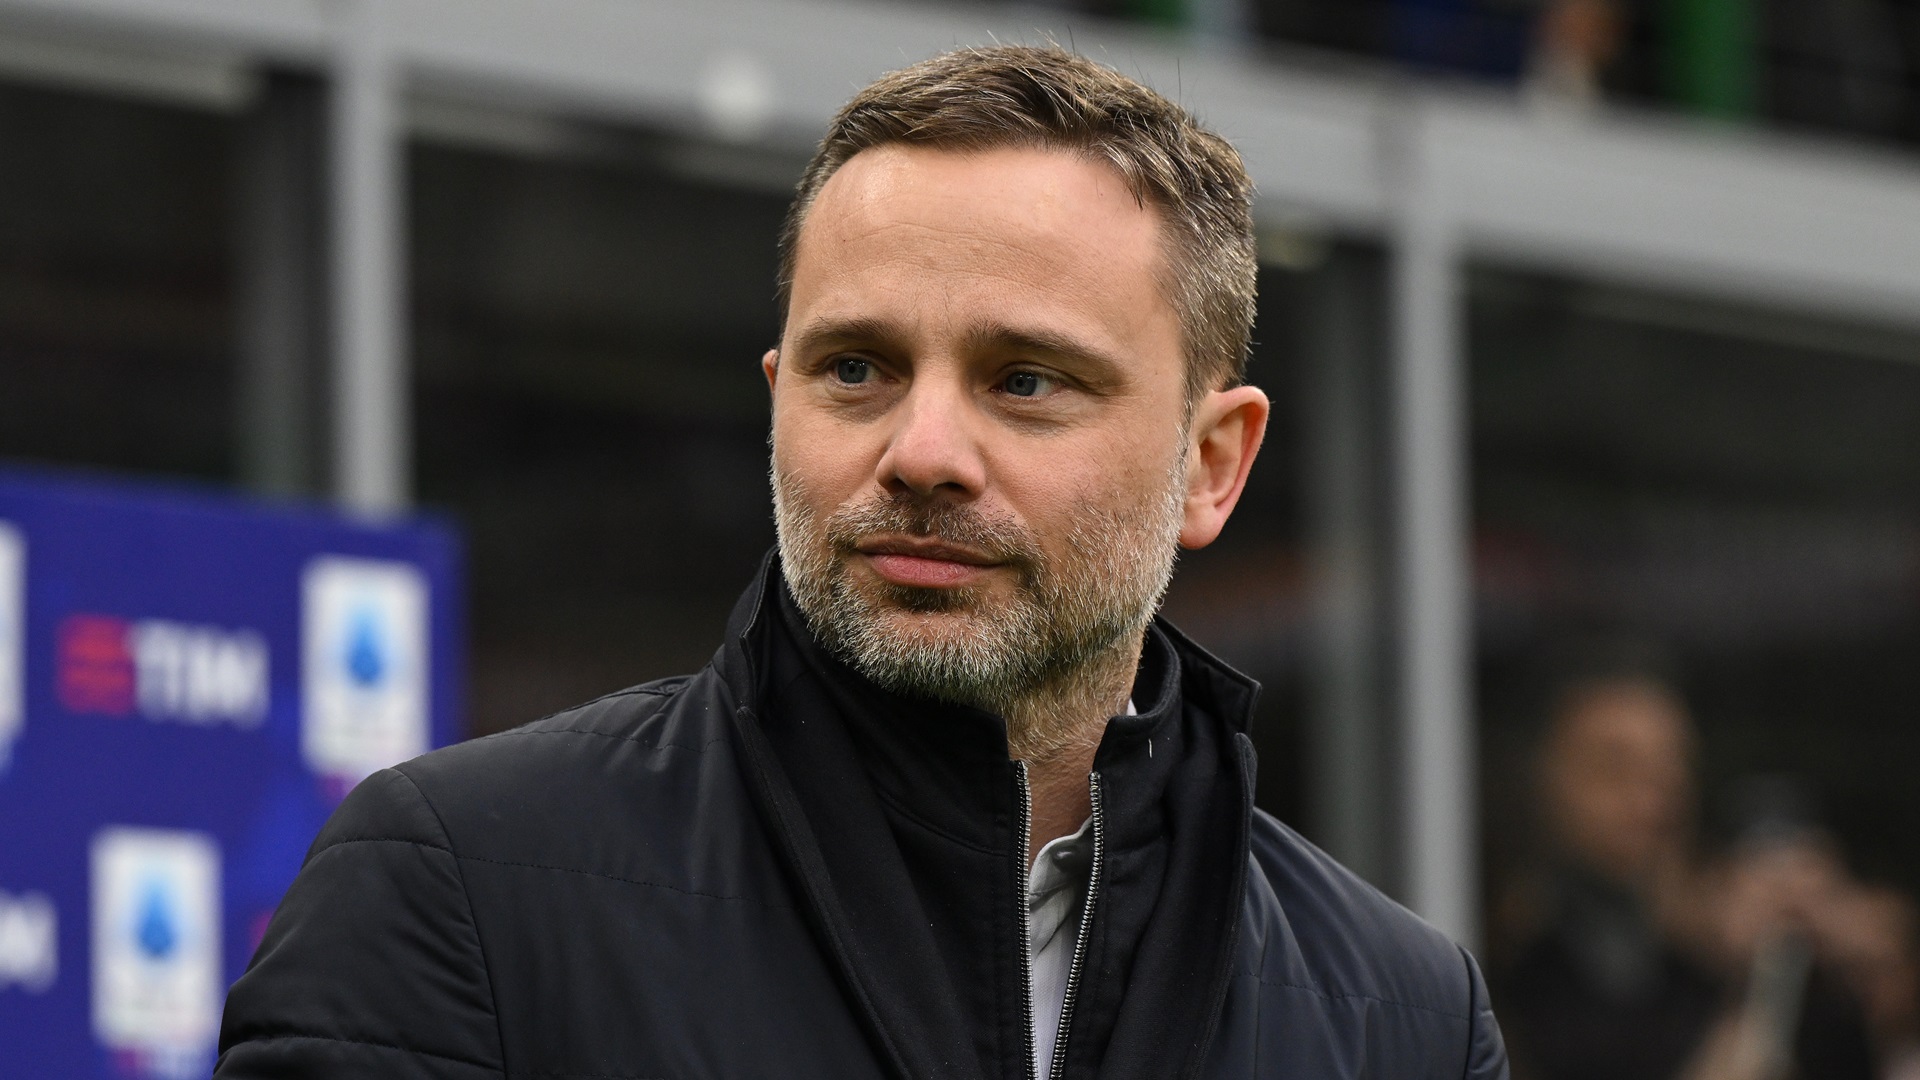 Milan chief Giorgio Furlani has ambitious goals and plans to challenge Inter next season: “Our objective was and remains to win."